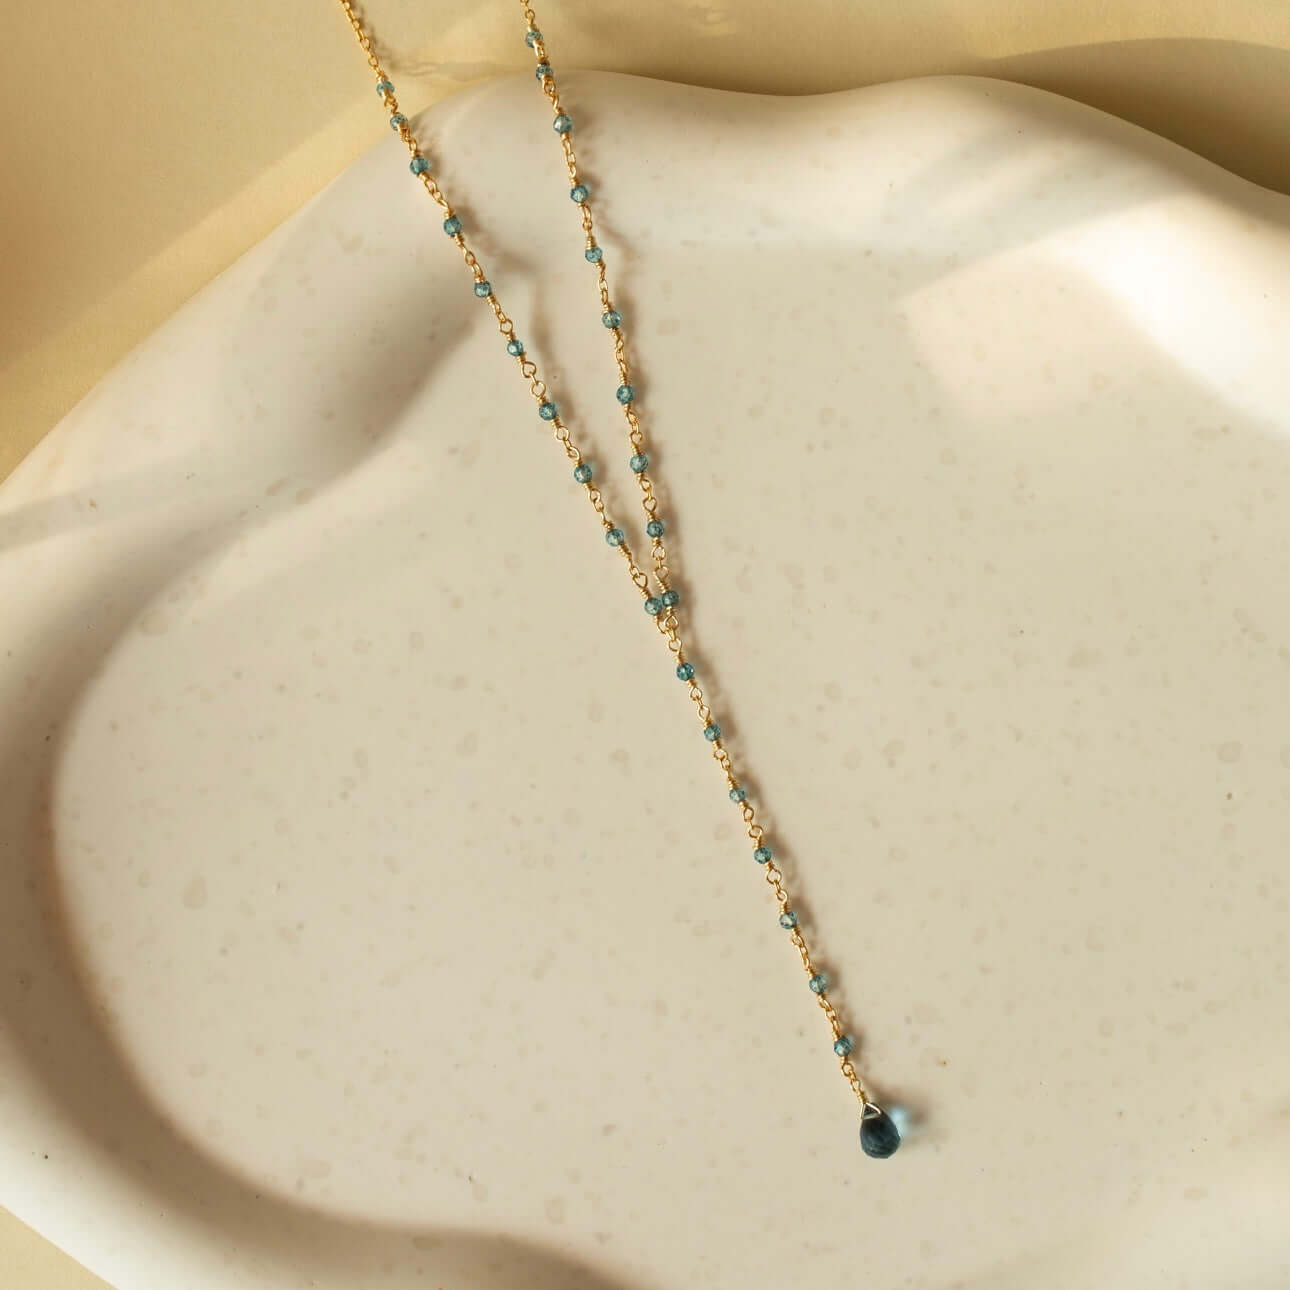 Against a clay plate backdrop, the lolite necklace showcases a calm and understated beauty—a simple scene of natural grace.